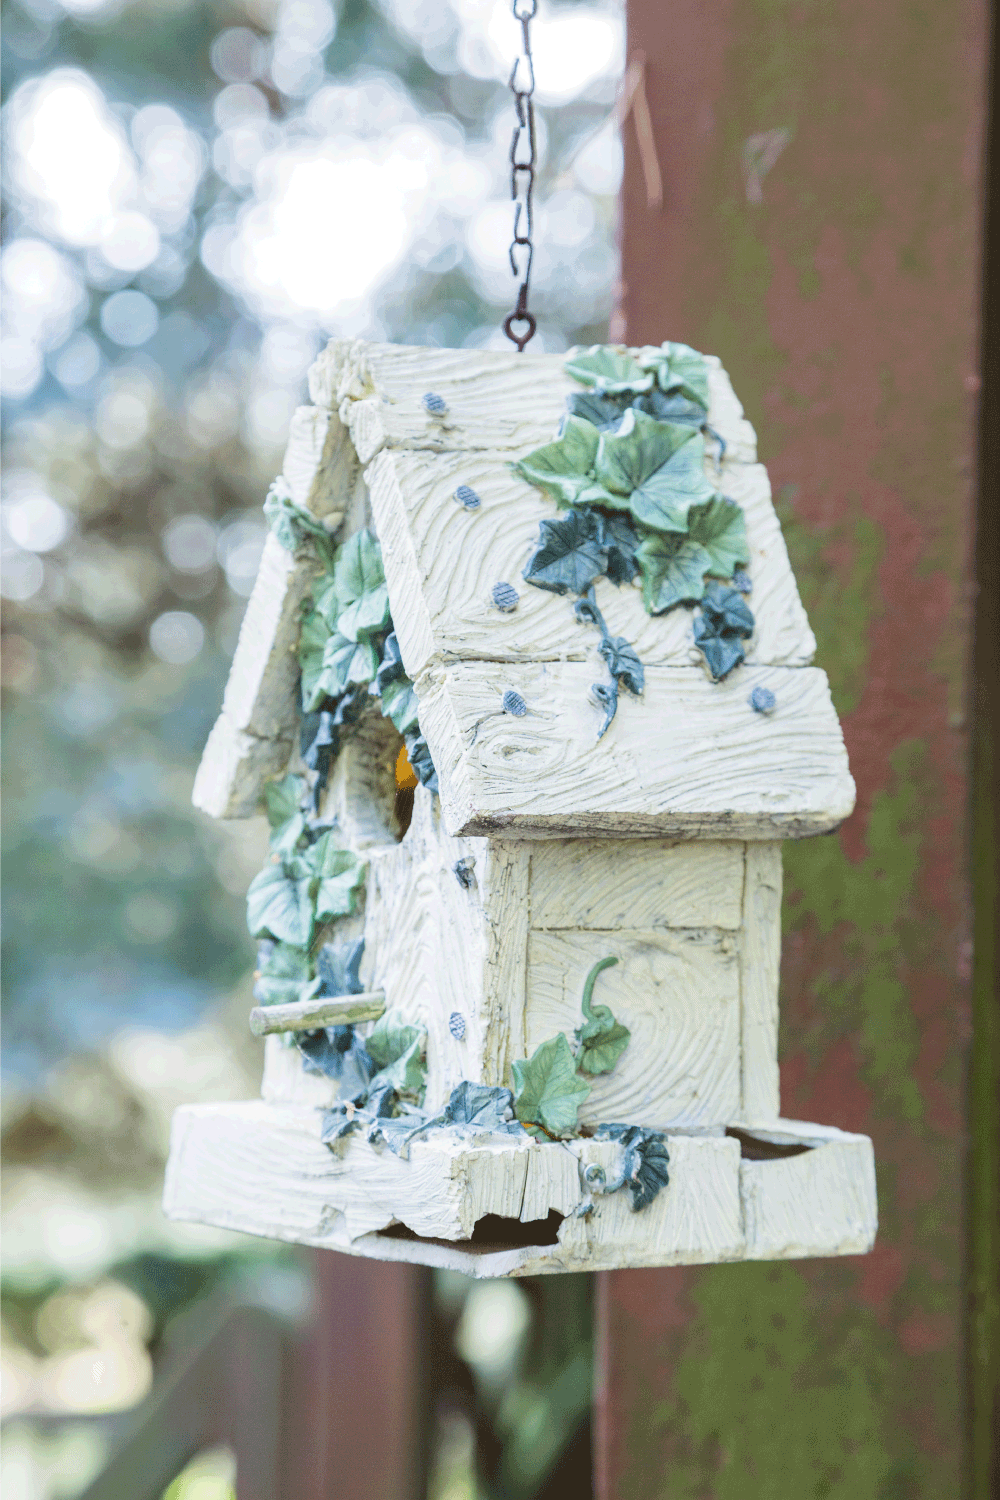 Ornate birdhouse with color stucco leaves hanging on chain with bird inside